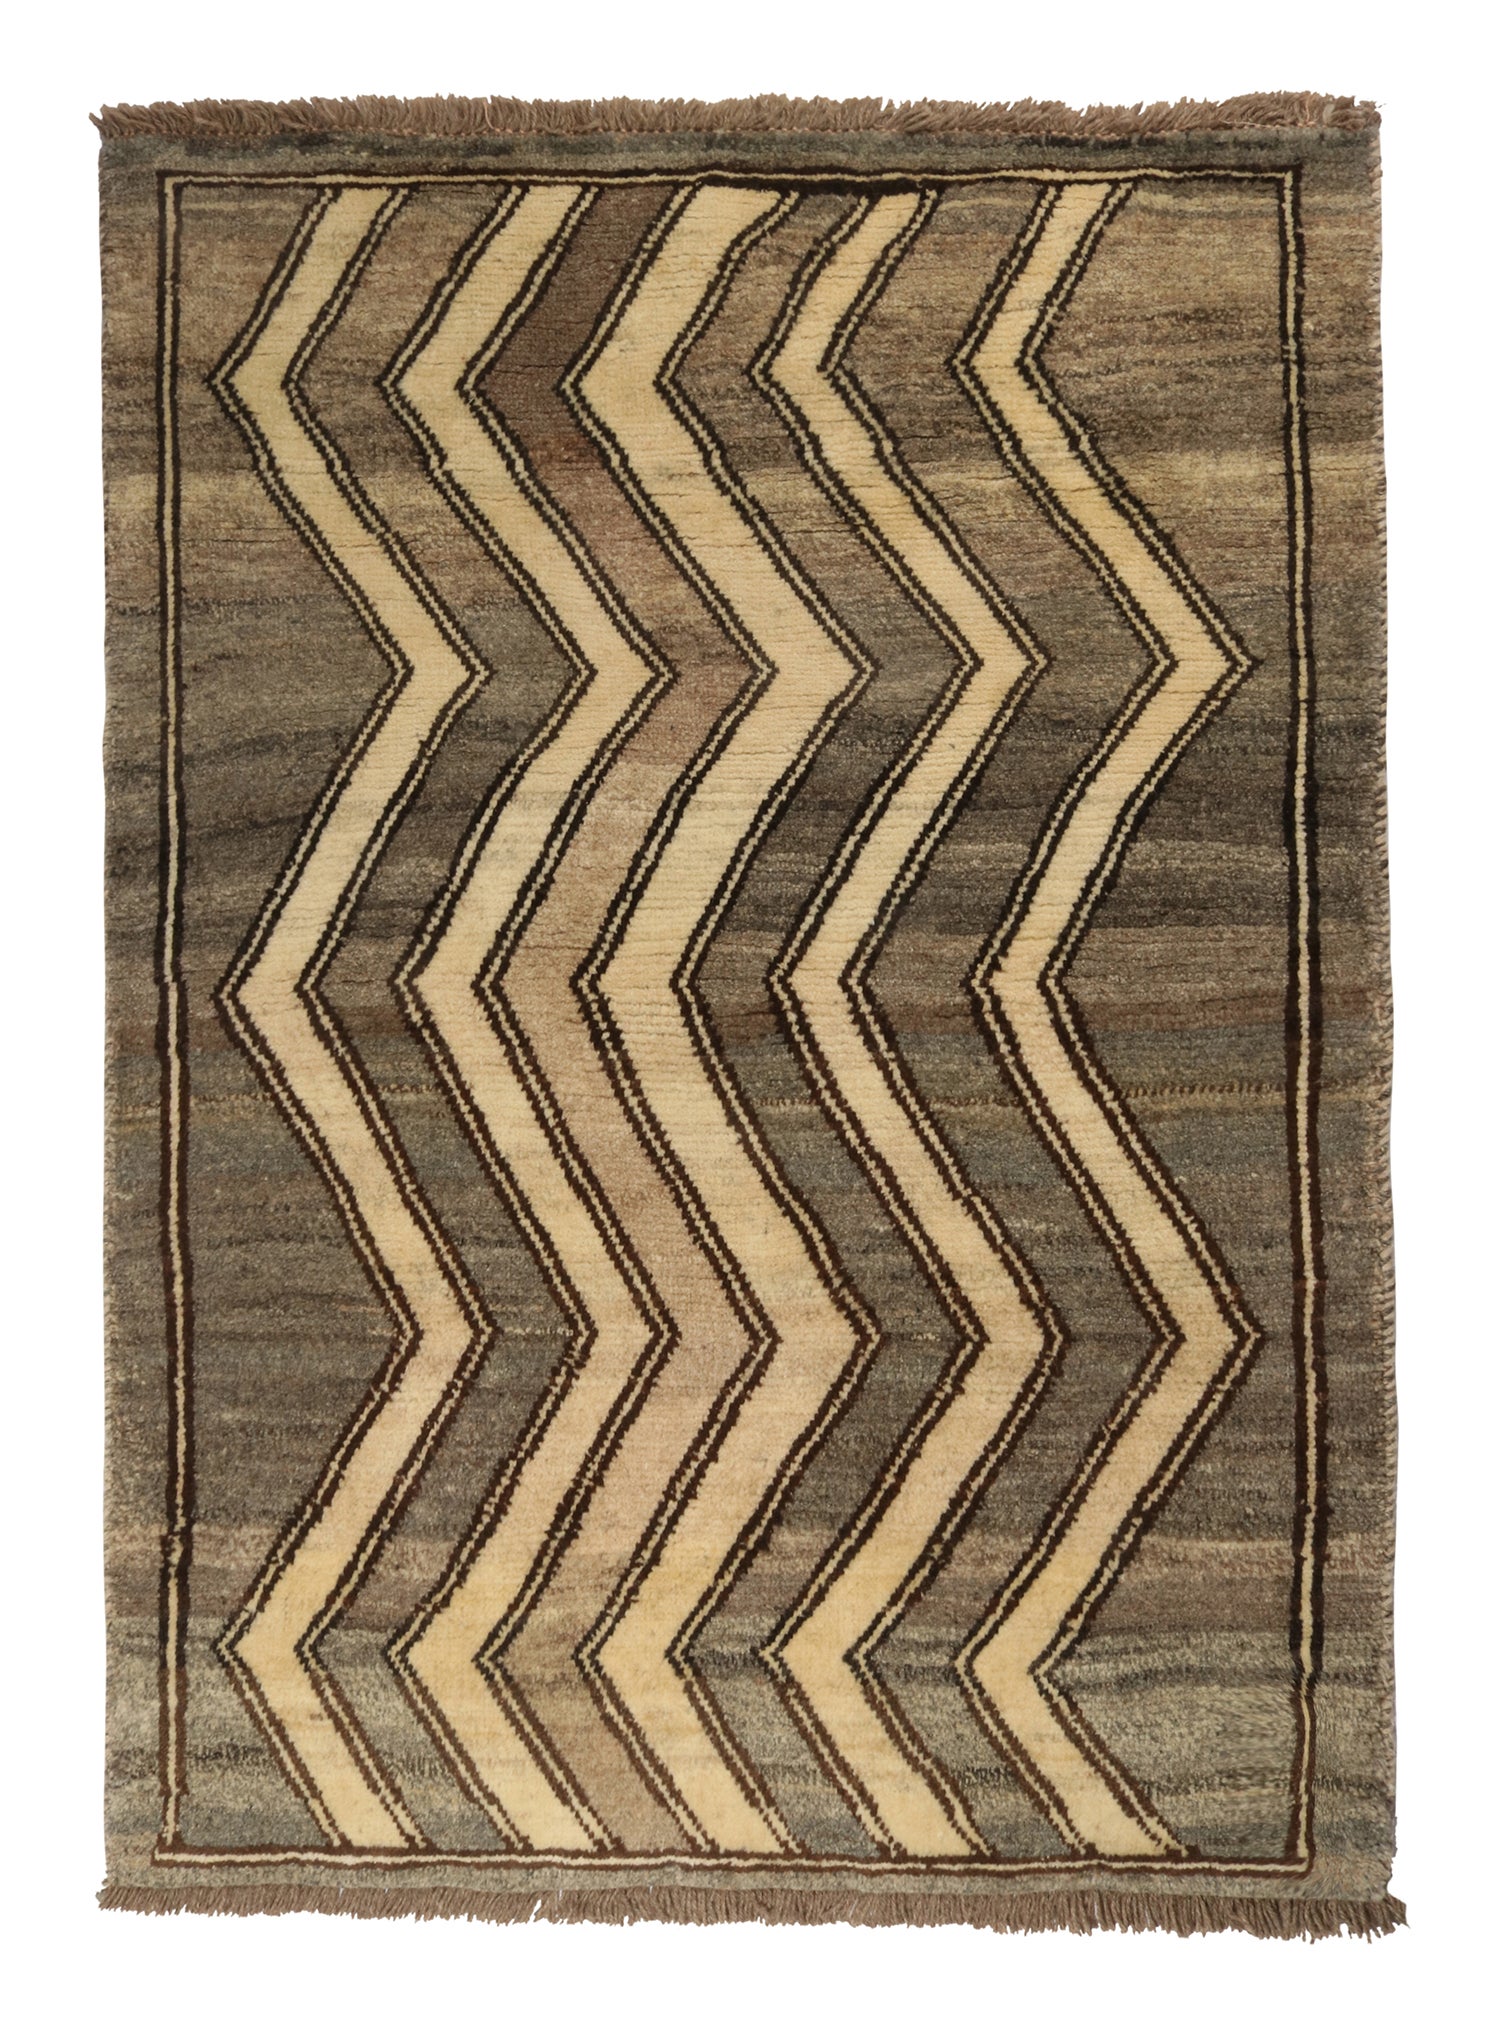 Vintage Gabbeh Rug in Gray and Beige-Brown Chevron Patterns by Rug & Kilim For Sale